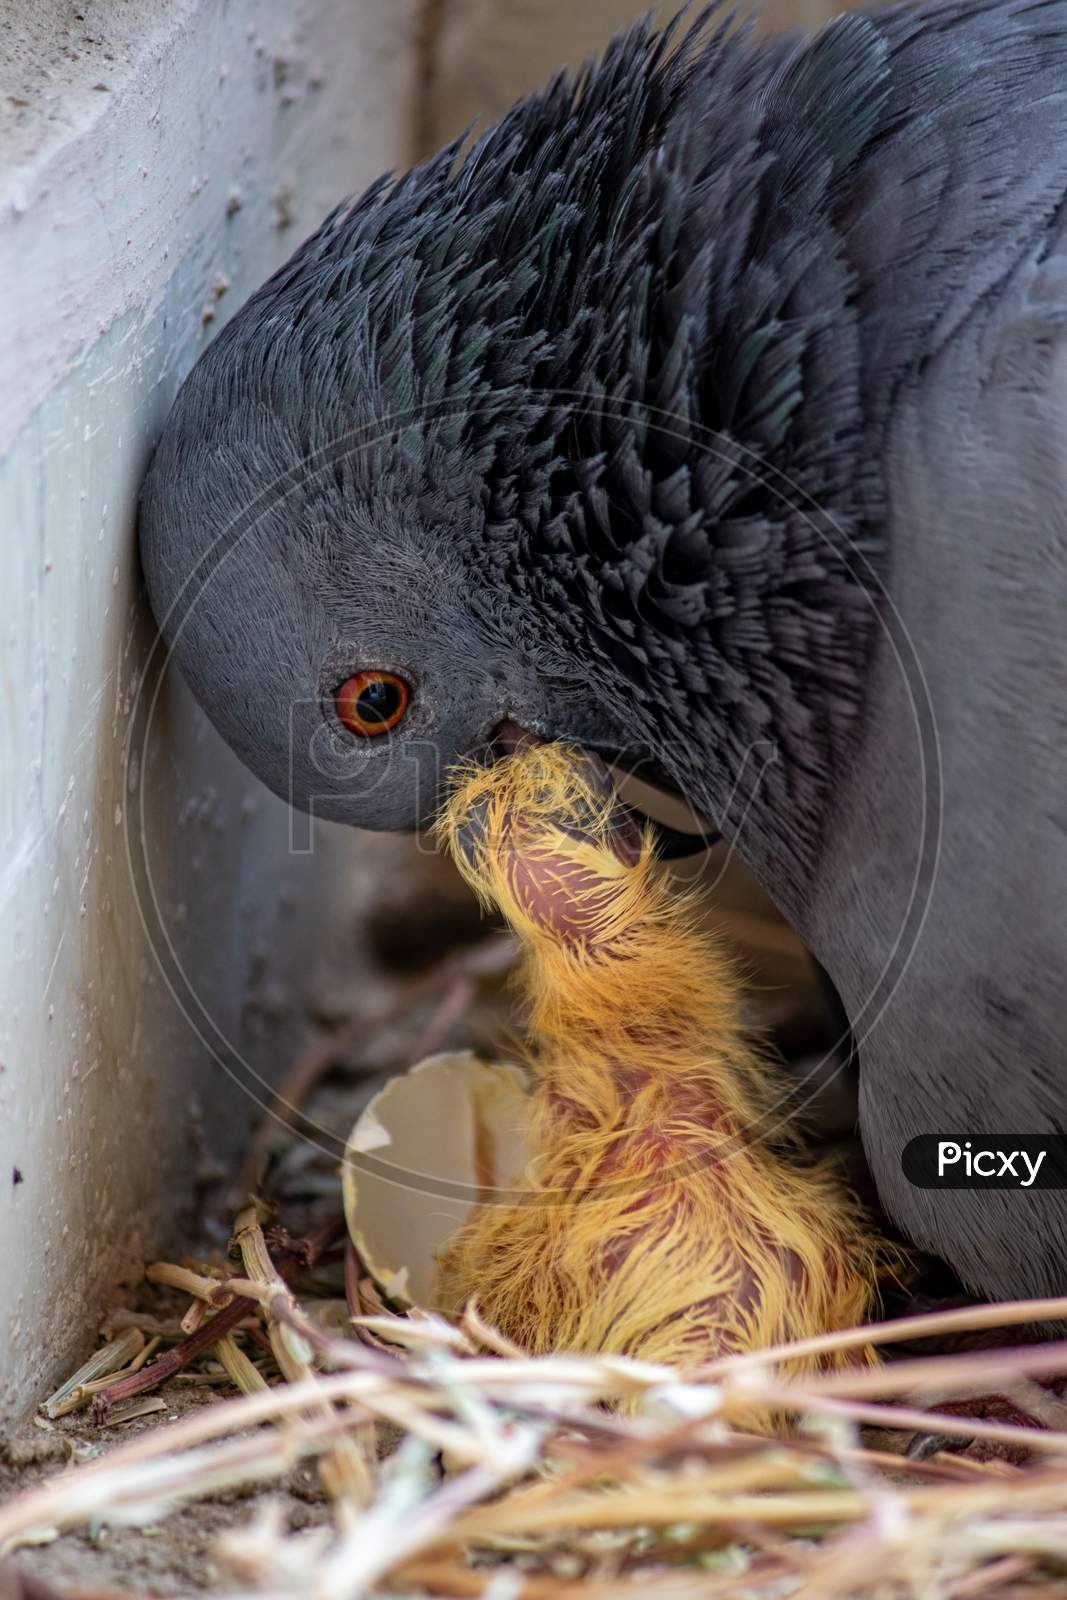 May 17, 2019, Etawah, Pigeon Mother Feeding Her Newly Born Squabs With Her Mouth.